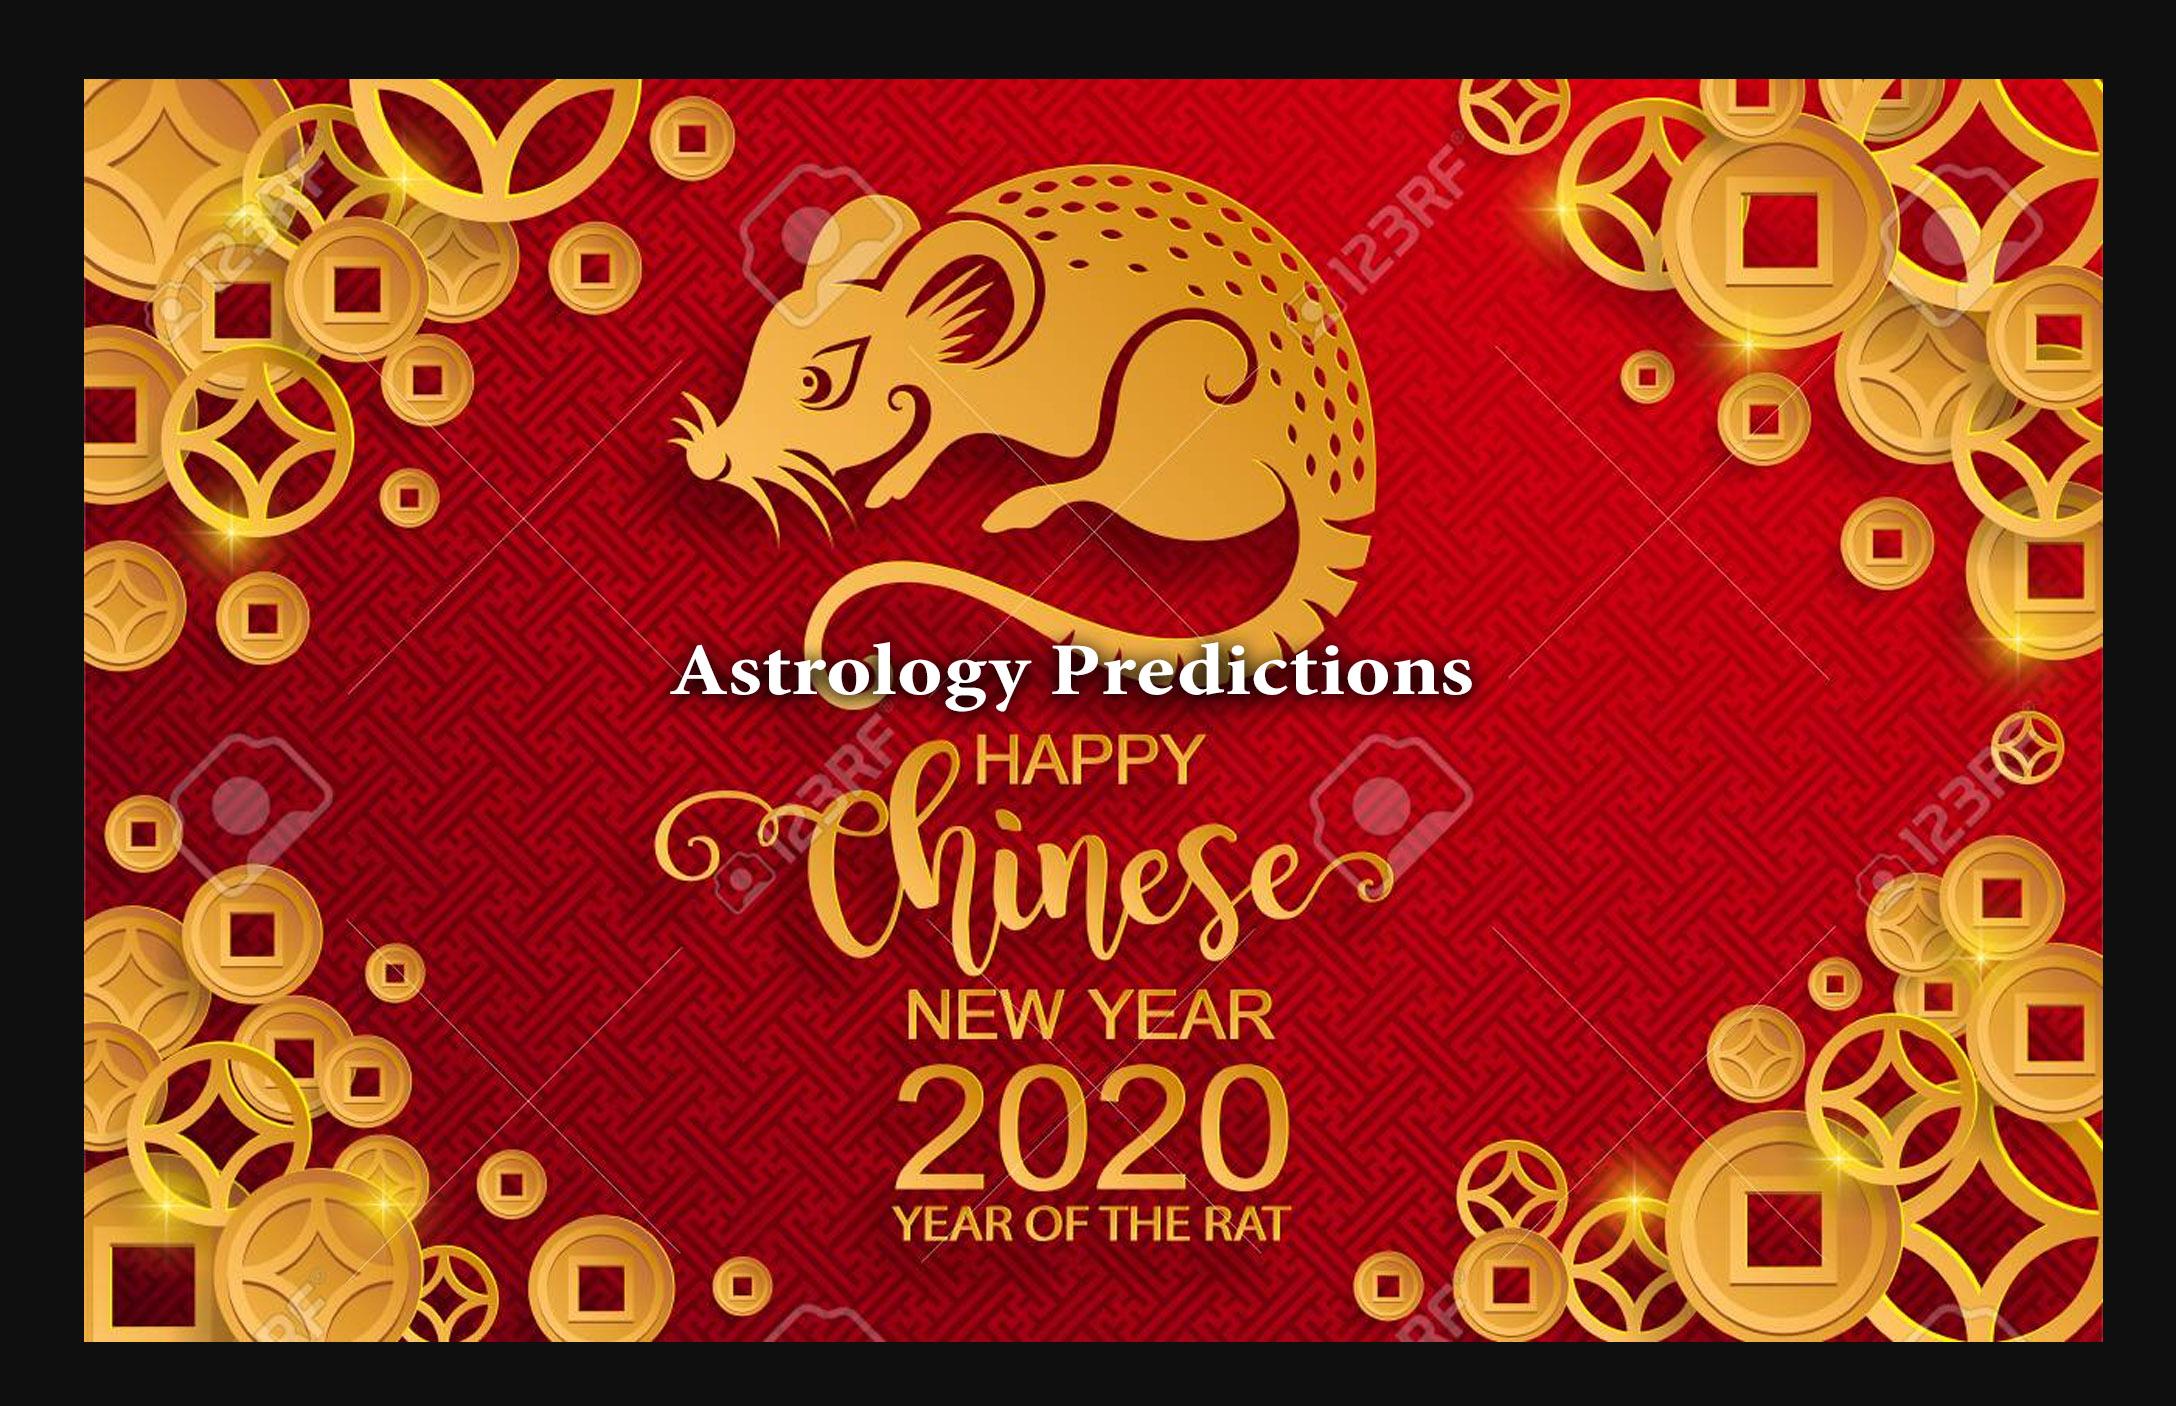 The Chinese New Year, Astrology Predictions - The Year of The Metal Rat!